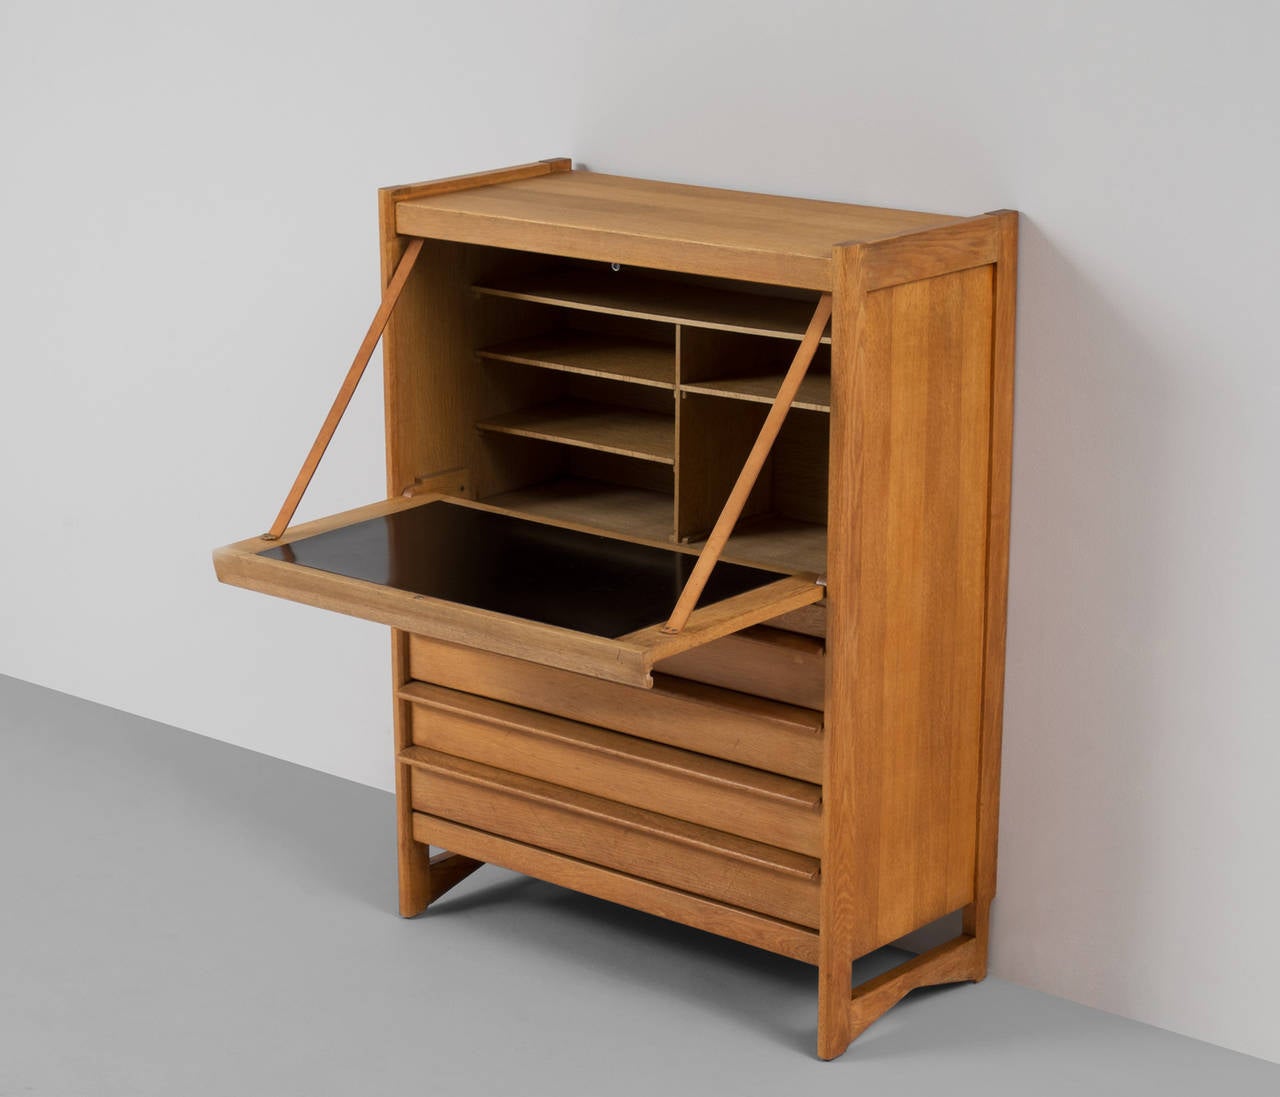 Guillerme and Chambron, high board and desk, oak, France, 1950s

This sculptural cabinet is made by the designer duo Guillerme and Chambron. The piece is executed in solid oak and features sculptural lines and soft edges. The piece holds a folding